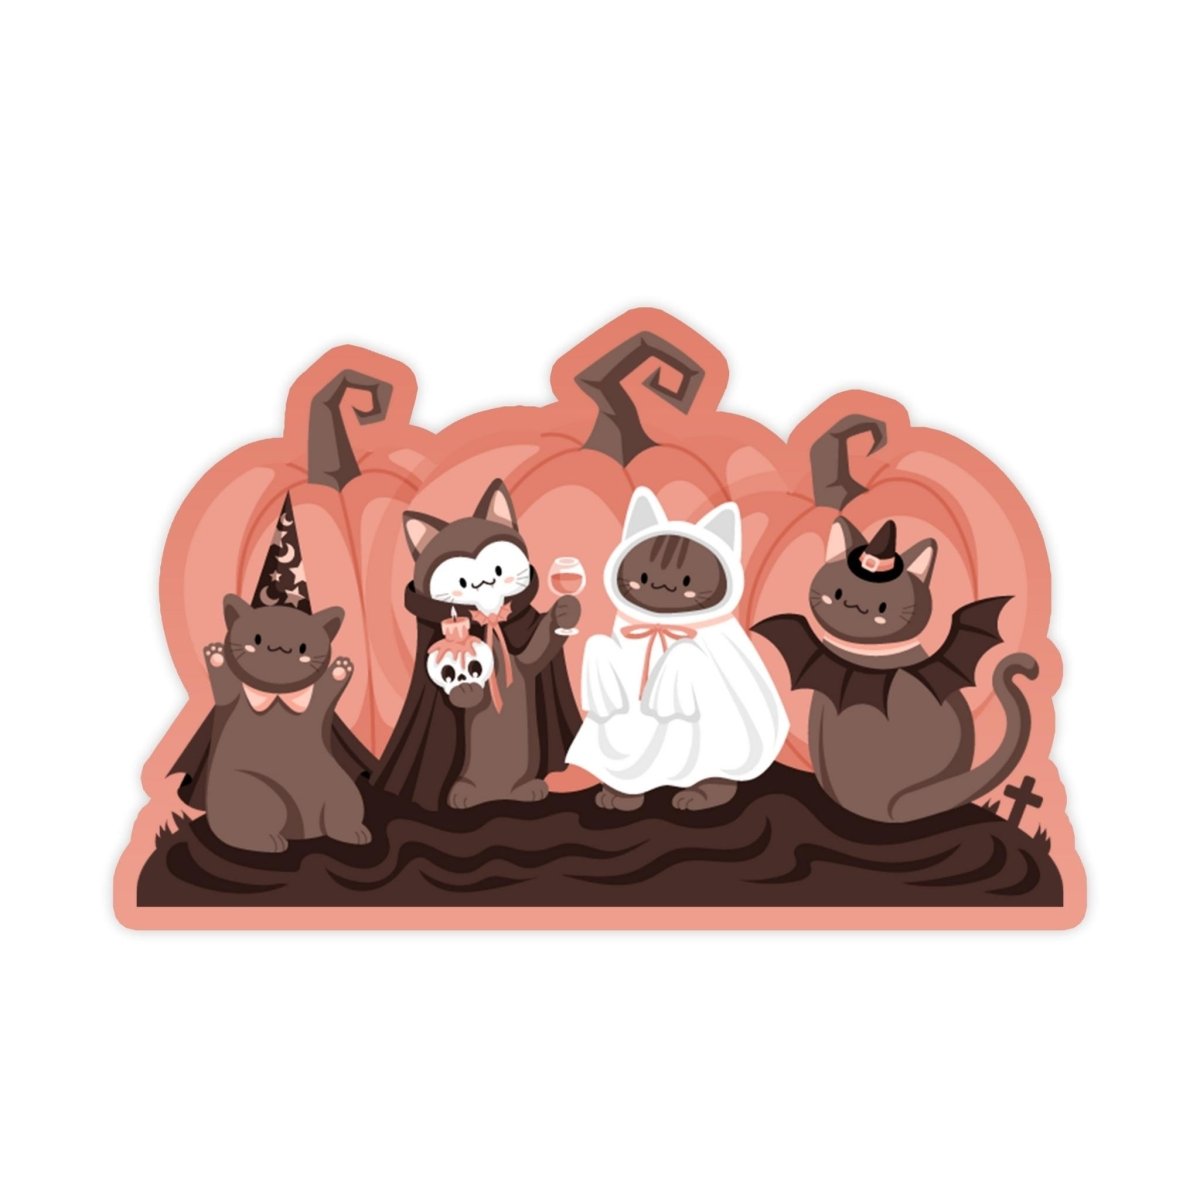 Cute Halloween Cats Sticker - stickerbullCute Halloween Cats StickerRetail StickerstickerbullstickerbullTaylor_HalloweenCatsPink [#288]This image depicts a group of cats wearing various clothing items. In the center, there is a white-furred cat wearing a long robe and holding a glass of wine in its paw.